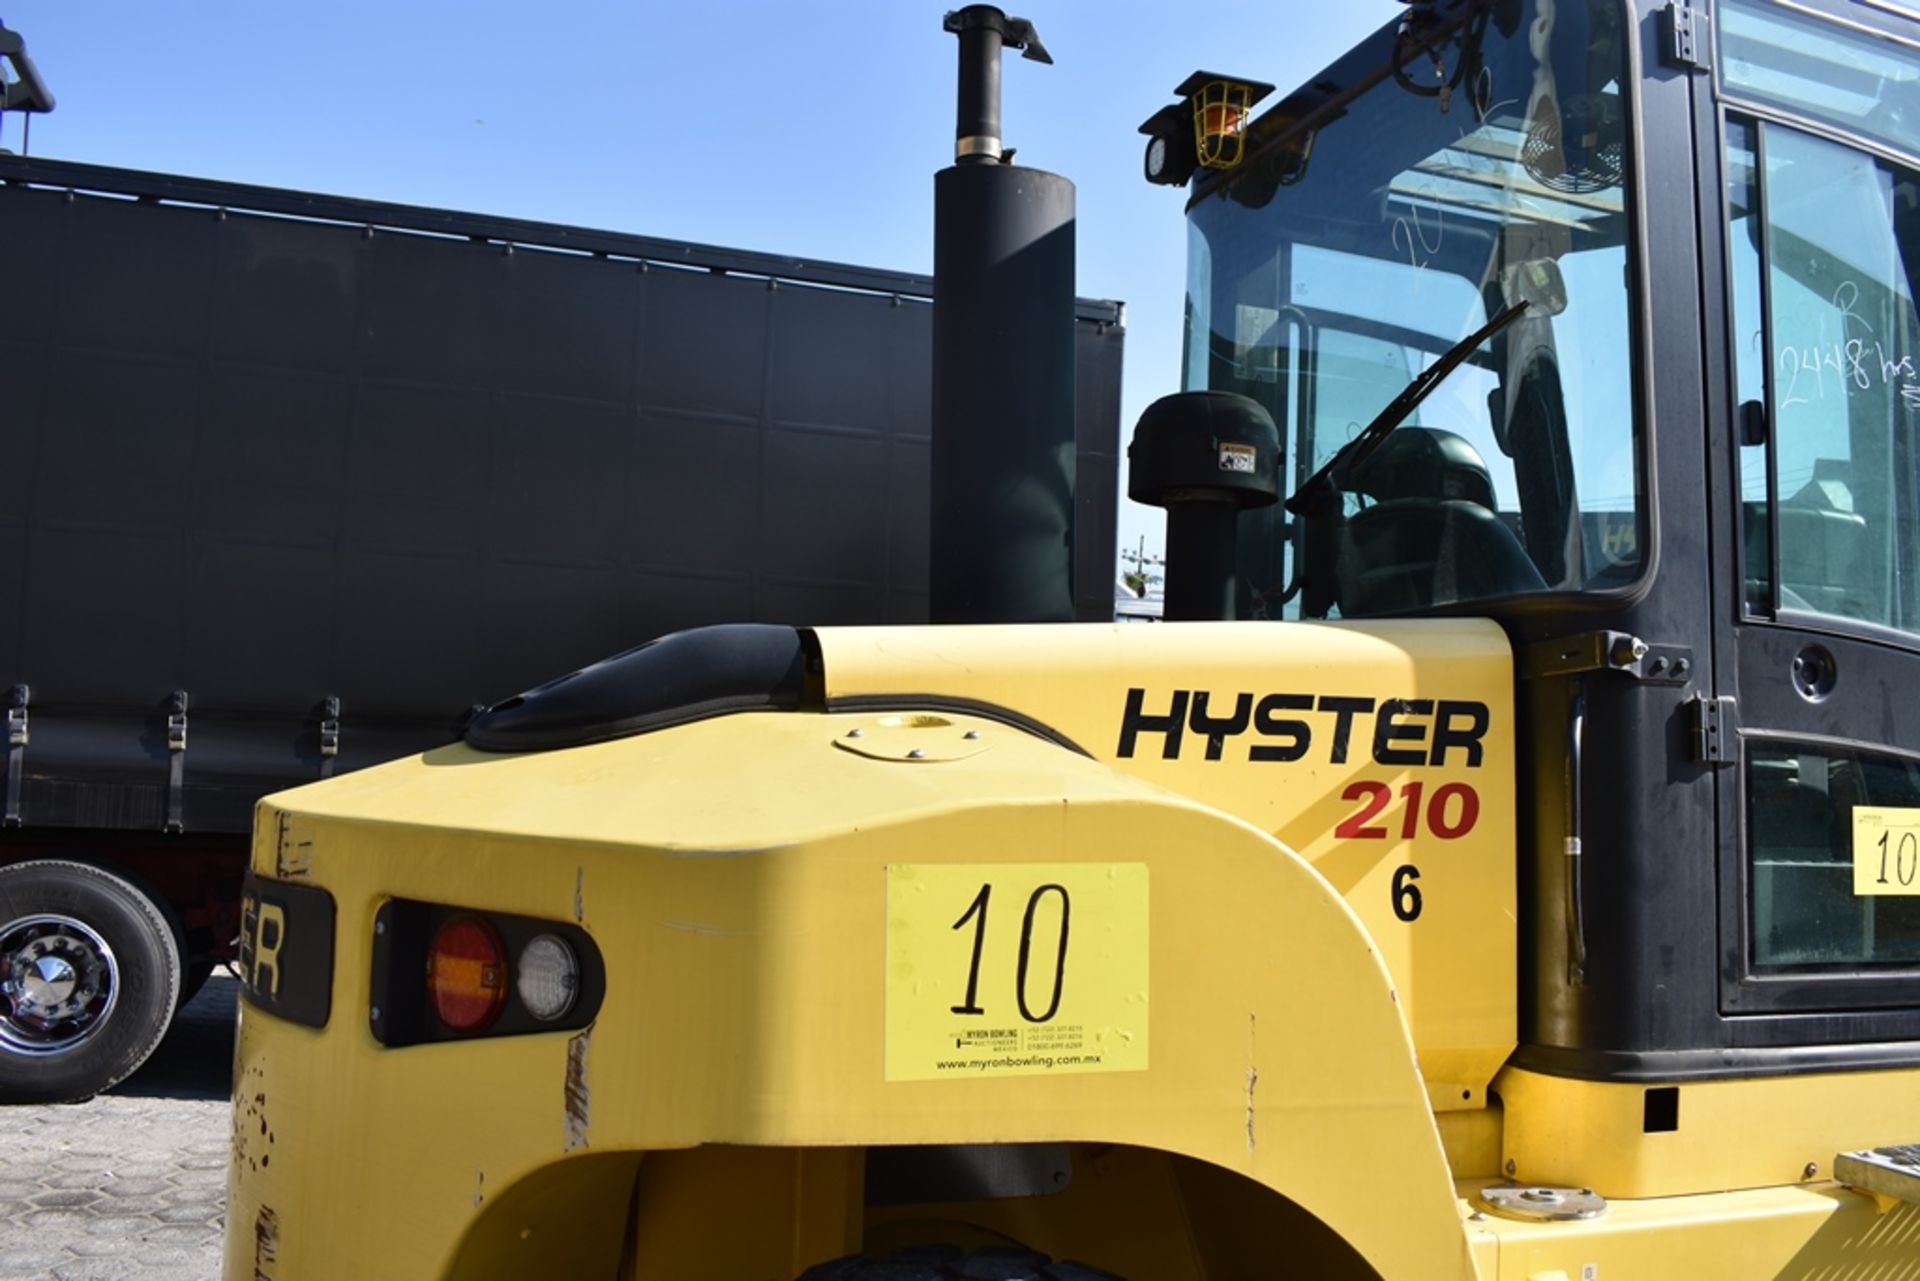 Hyster Forklift, model H210HD2, year 2017, 19,100 lb capacity, 2450 hours - Image 46 of 131